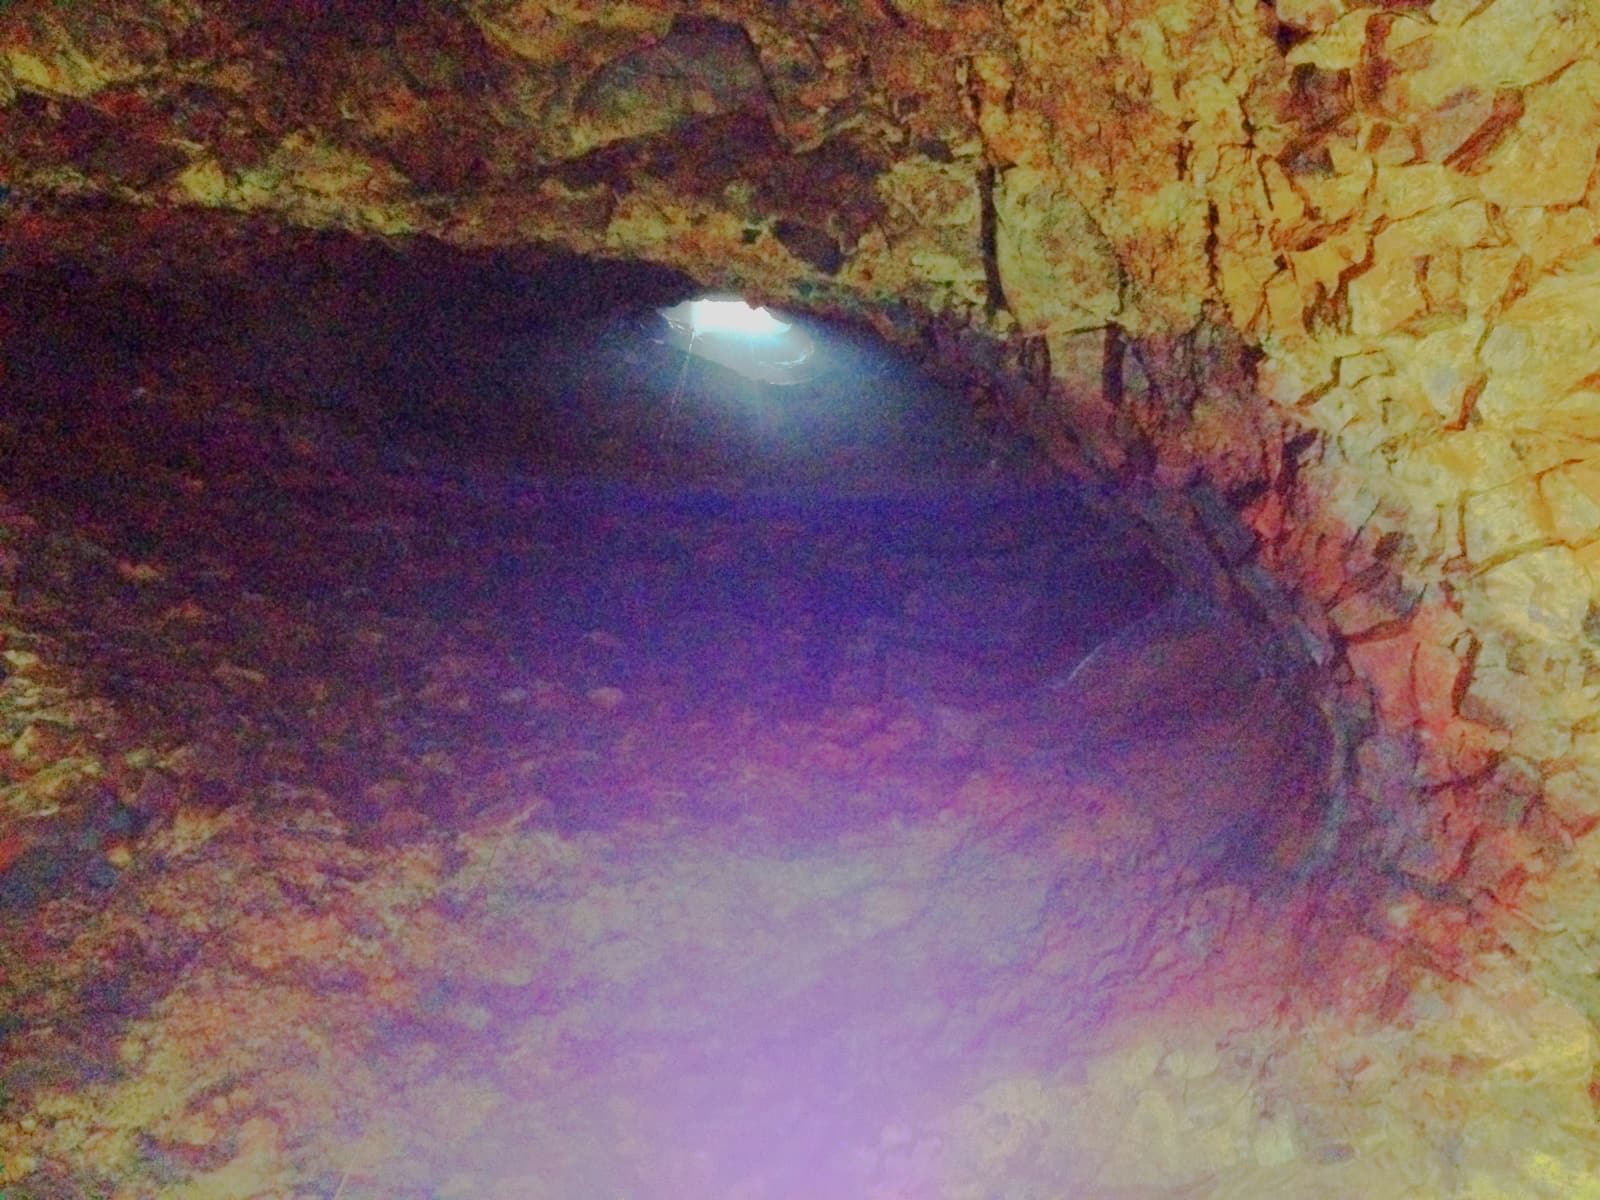 Looking 700 feet/215 meters upward from the bottom of a lava tube towards a small aperture where the sunlight enters